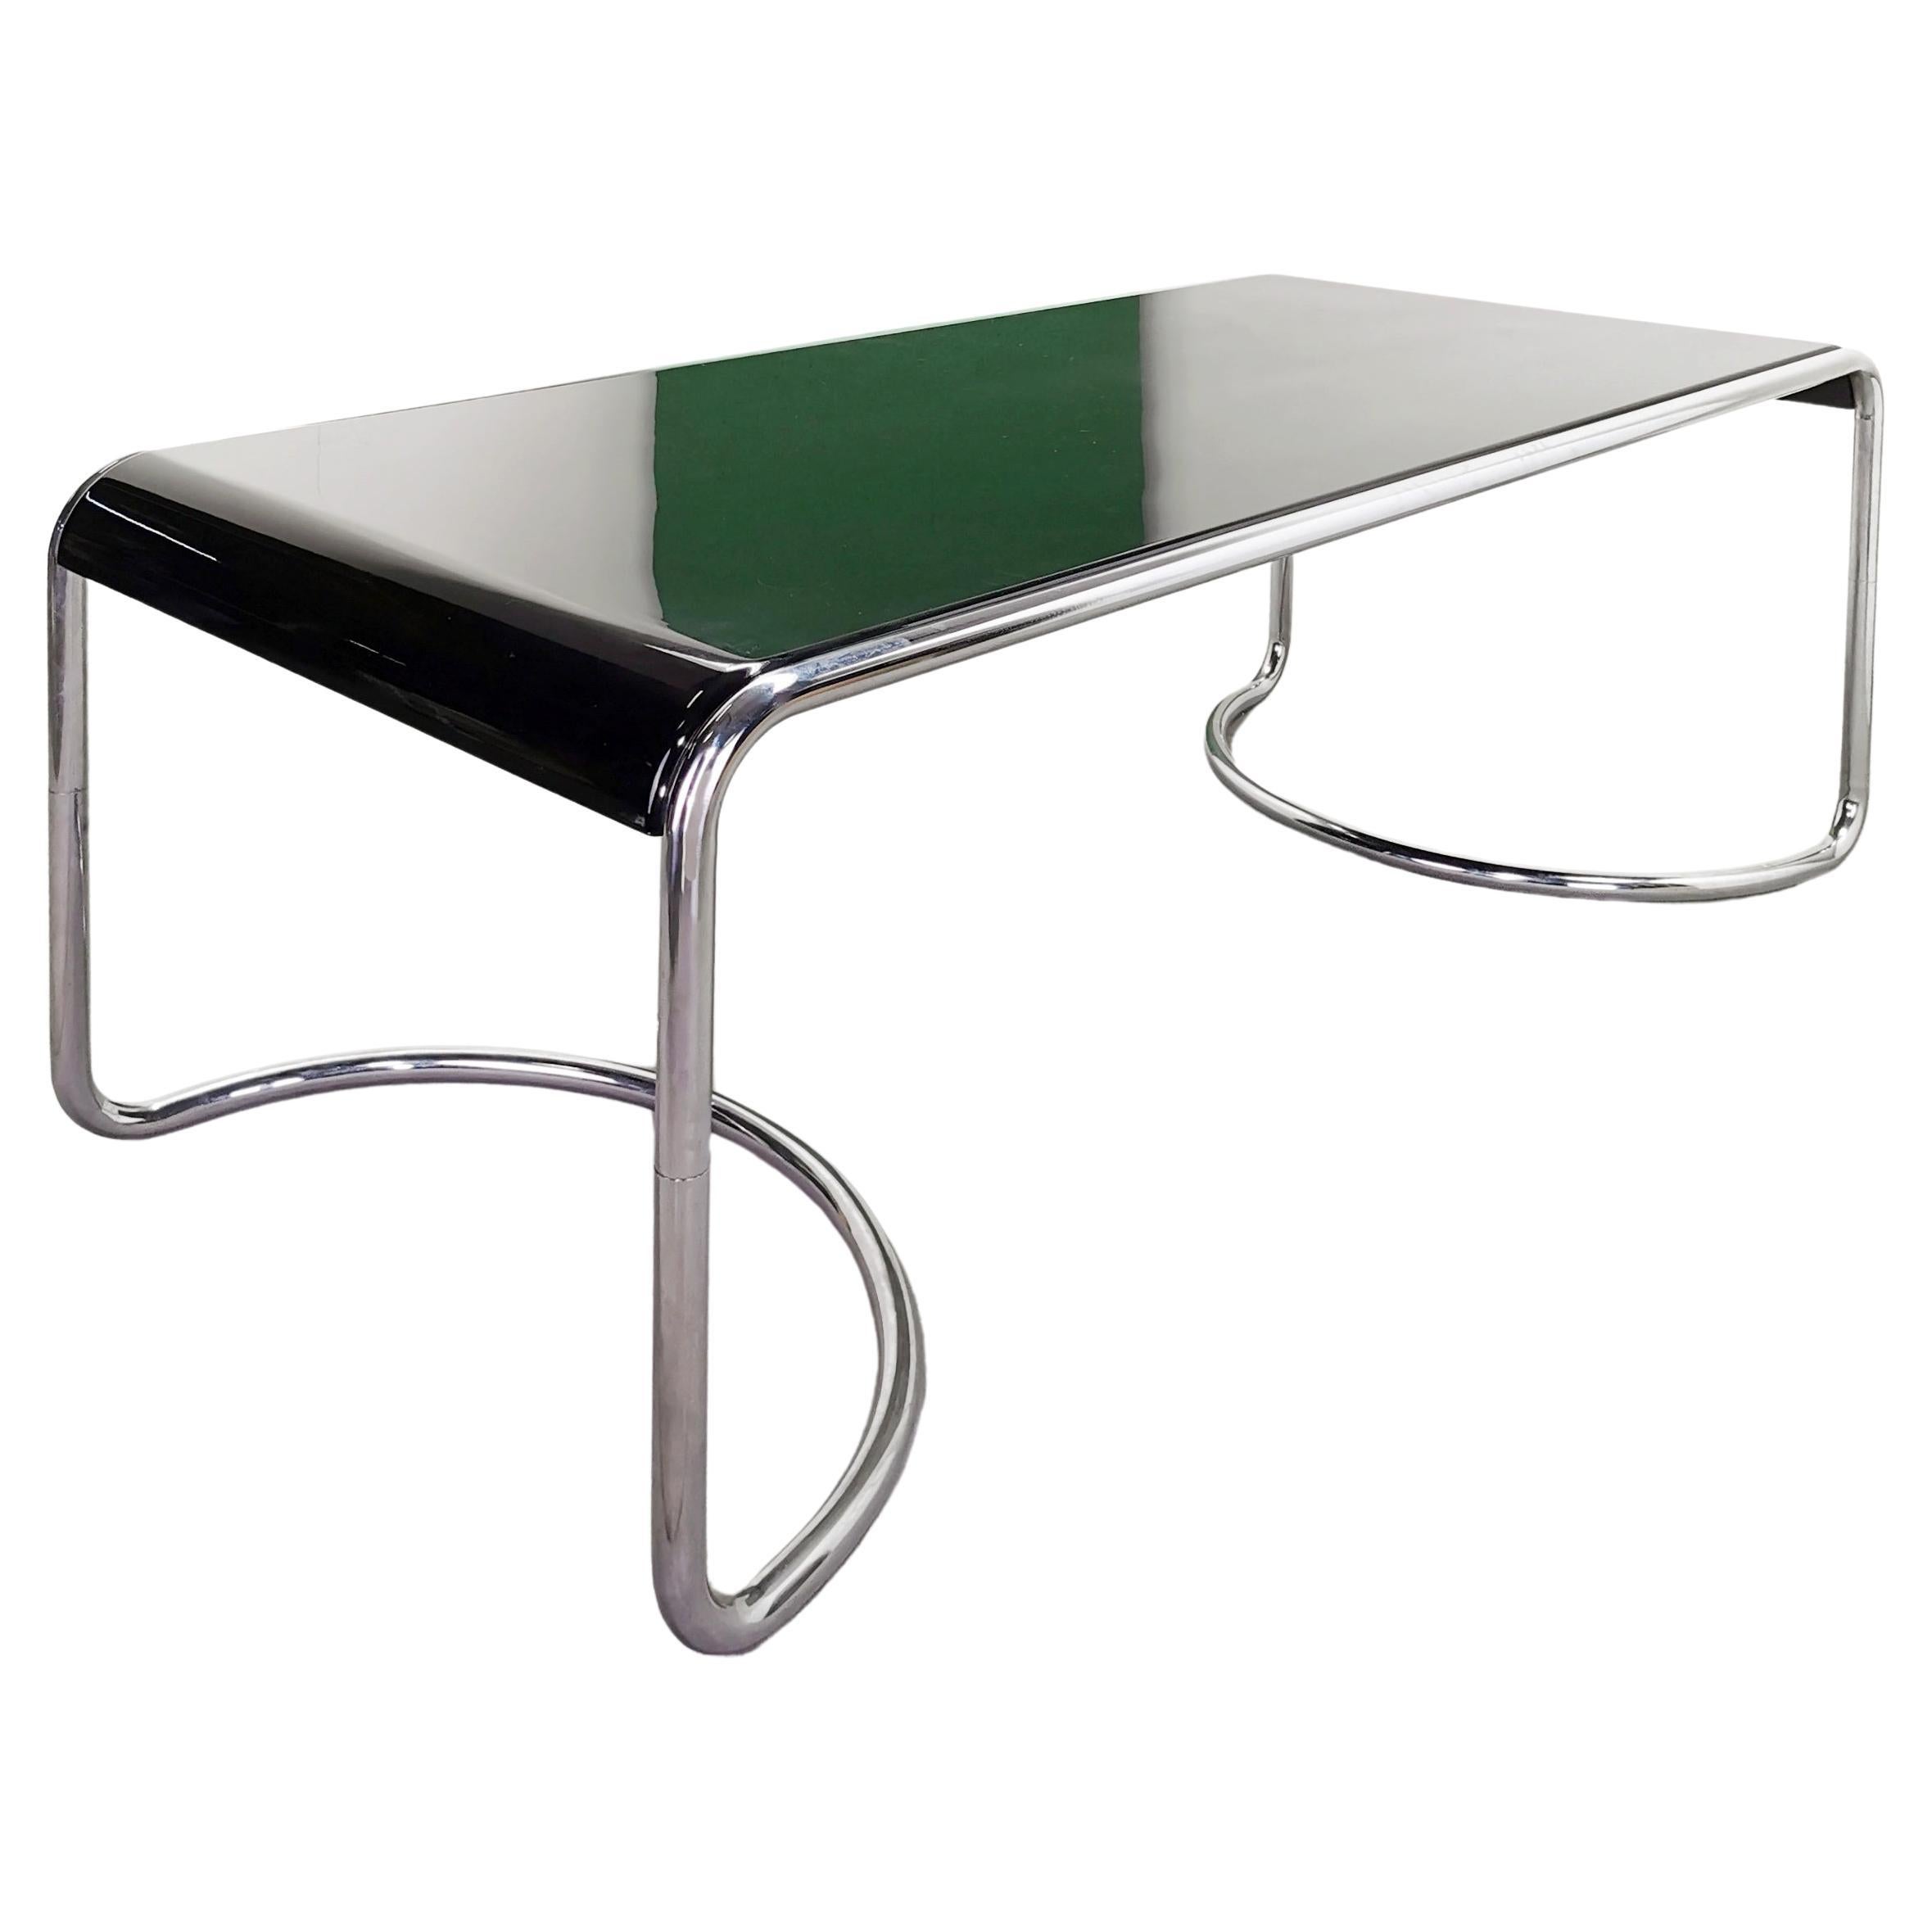 Febo desk or dining table designed by G.Stoppino for Driade 1970